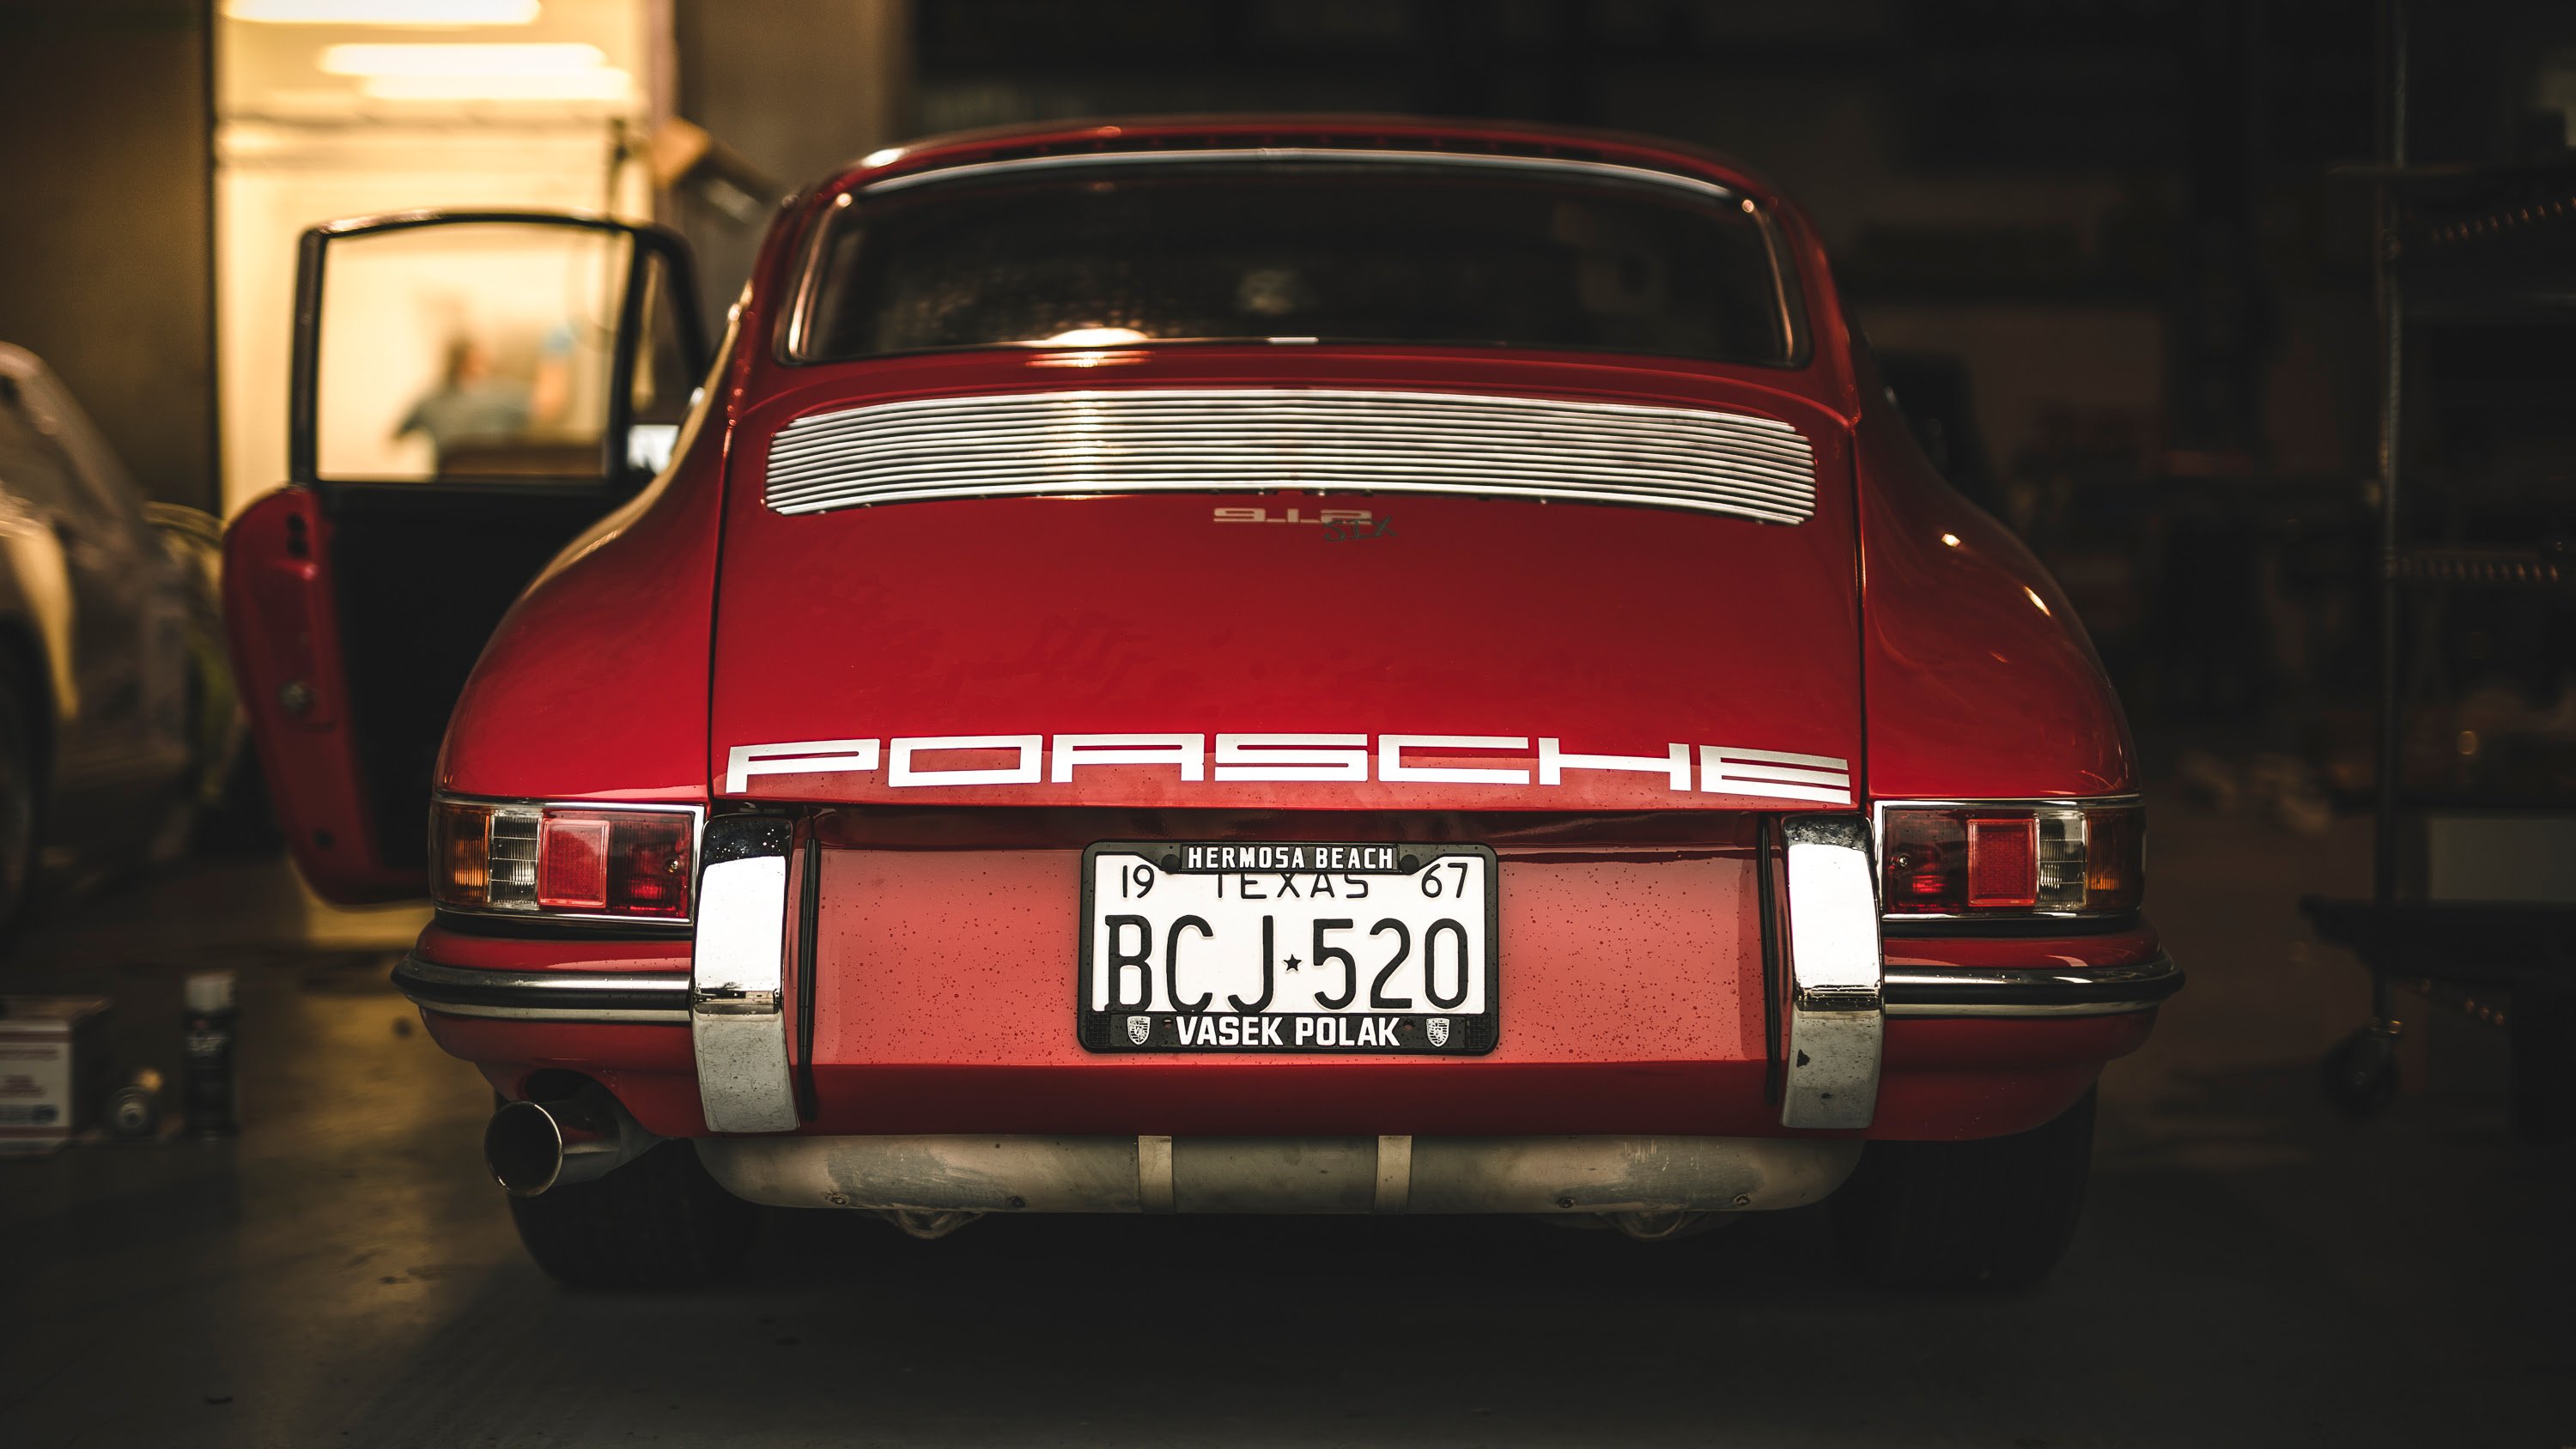 Red 912 with a flat six engine swap.